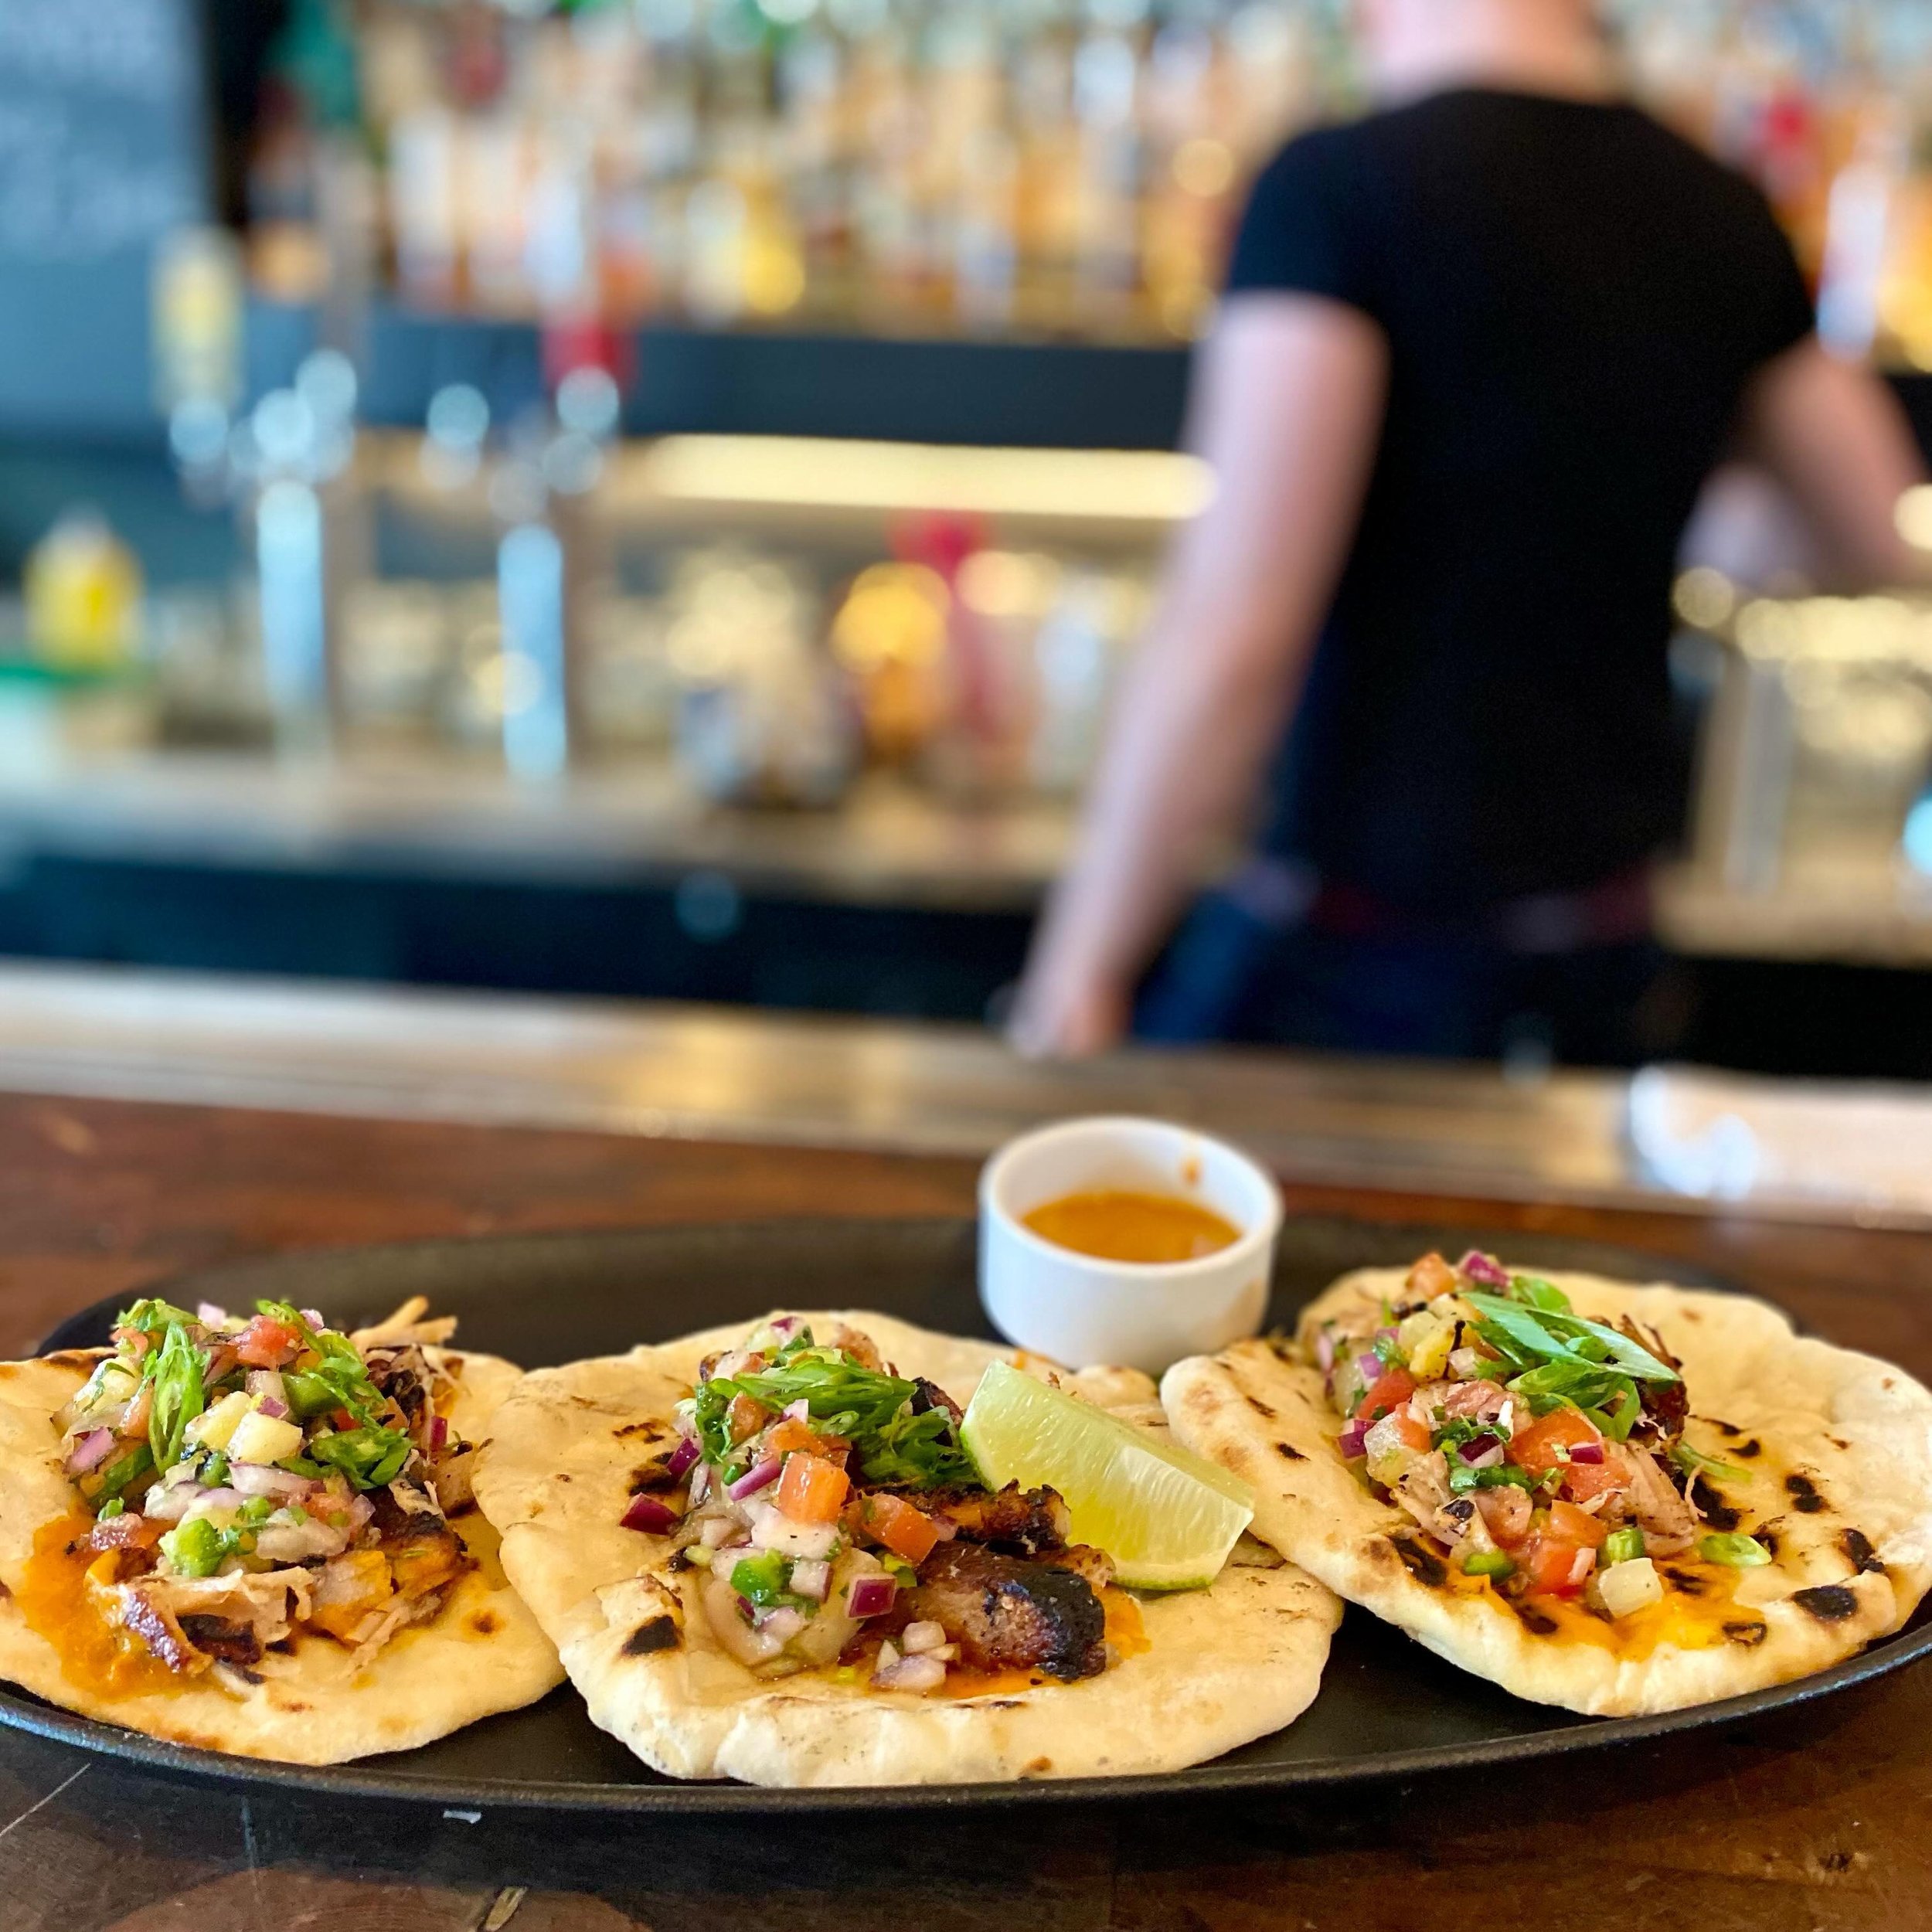 TUESDAY FEATURE!

A real smoky, stop-you-in-you-tracks take on tacos on tap tonight from our Head Chef Darrel Ahenakew:

𝗣𝗢𝗥𝗞 𝗕𝗘𝗟𝗟𝗬 𝗕𝗔𝗡𝗡𝗢𝗖𝗞 𝗧𝗔𝗖𝗢𝗦
𝗦𝗹𝗼𝘄-𝗿𝗼𝗮𝘀𝘁𝗲𝗱 𝗽𝗼𝗿𝗸, 𝗴𝗿𝗶𝗹𝗹𝗲𝗱 𝗽𝗶𝗻𝗲𝗮𝗽𝗽𝗹𝗲 𝗽𝗶𝗰𝗼 𝗱𝗲 ?